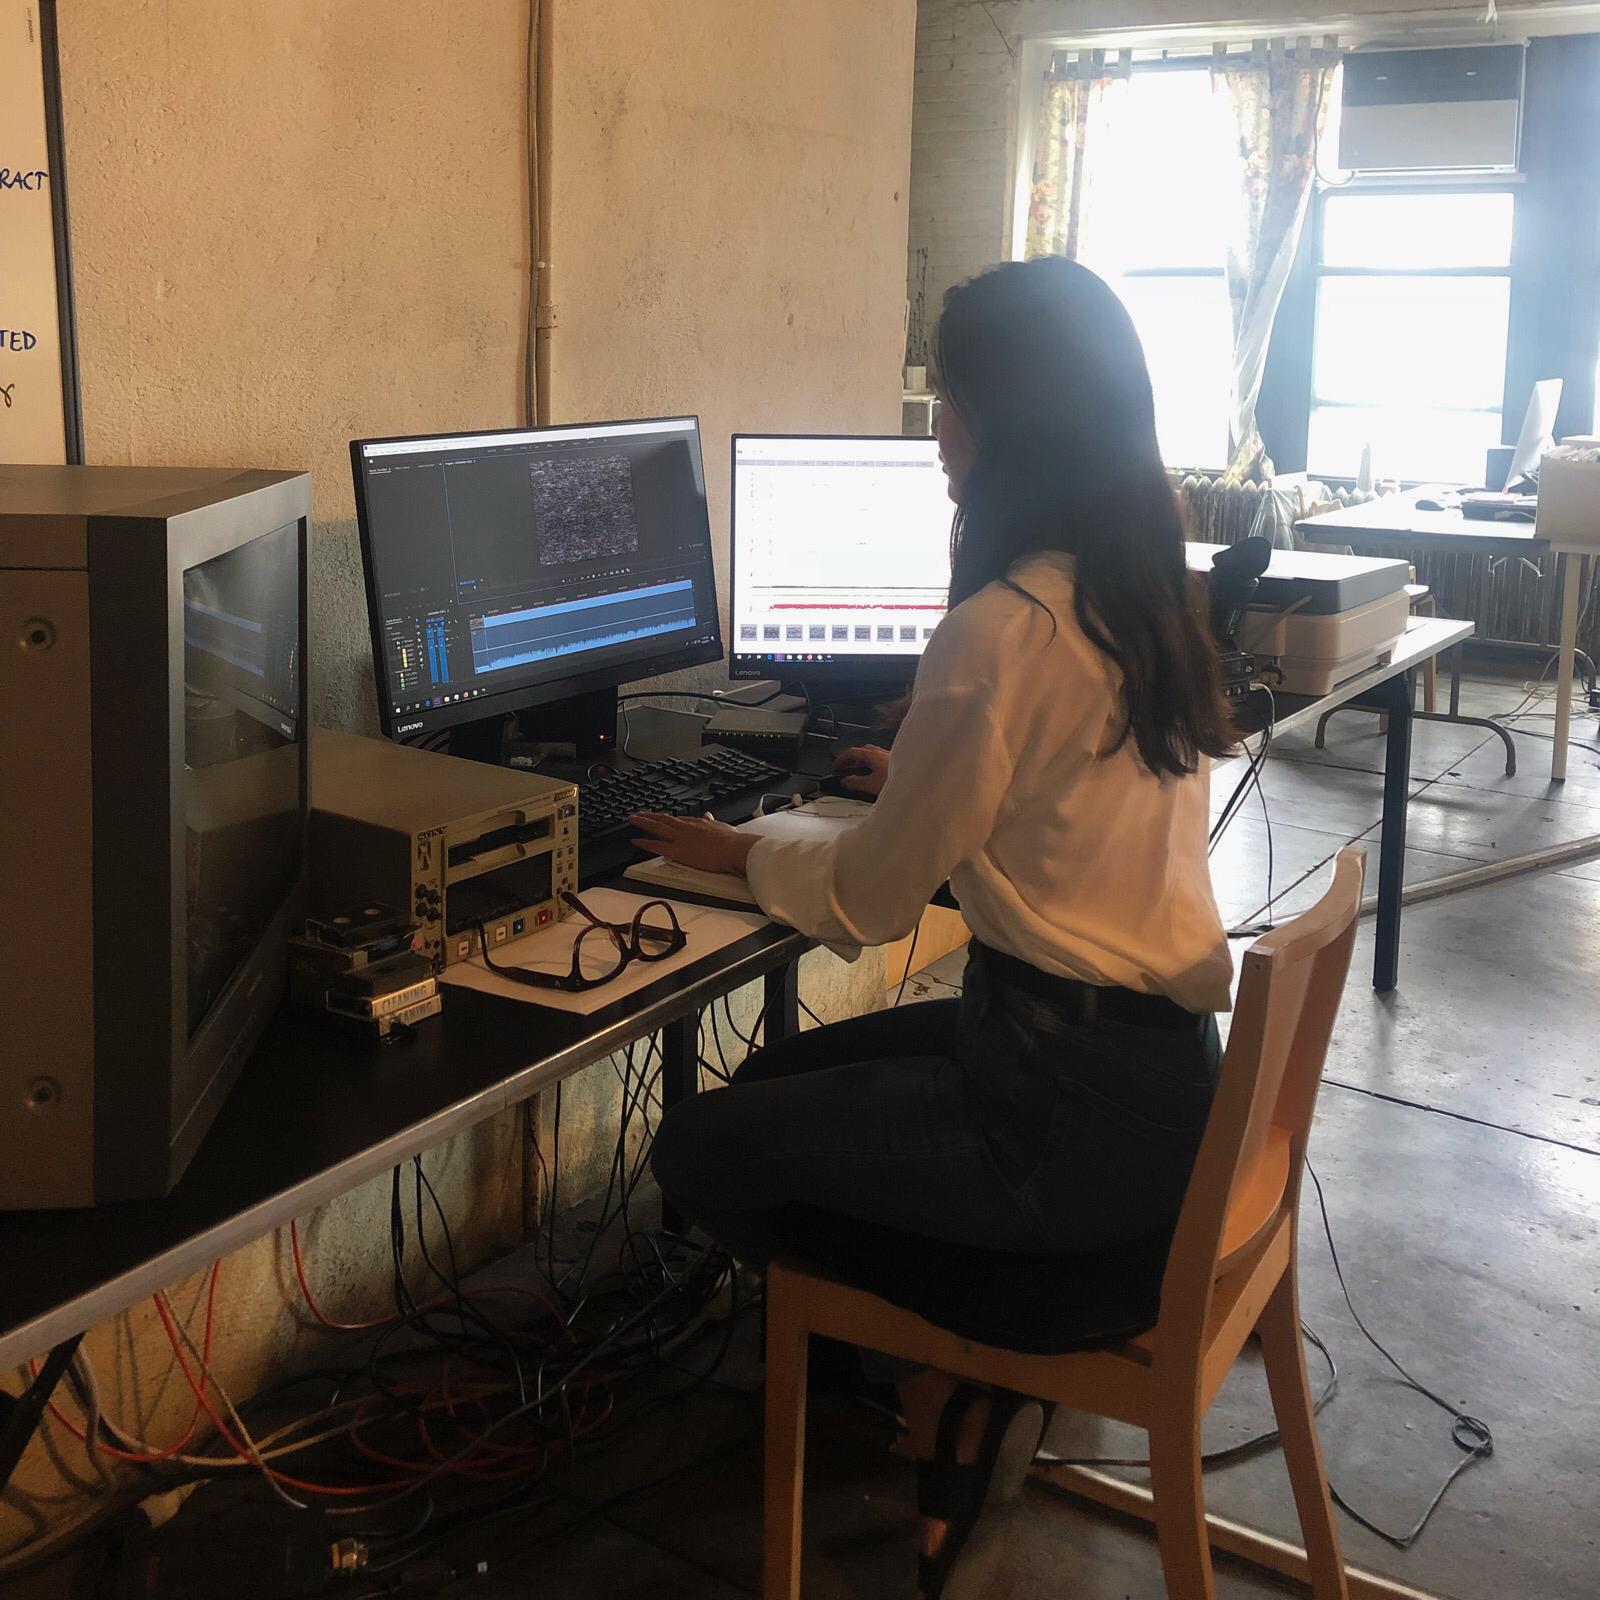 Lan Linh Nguyen Hoai interned at the New Museum in Summer 2019.